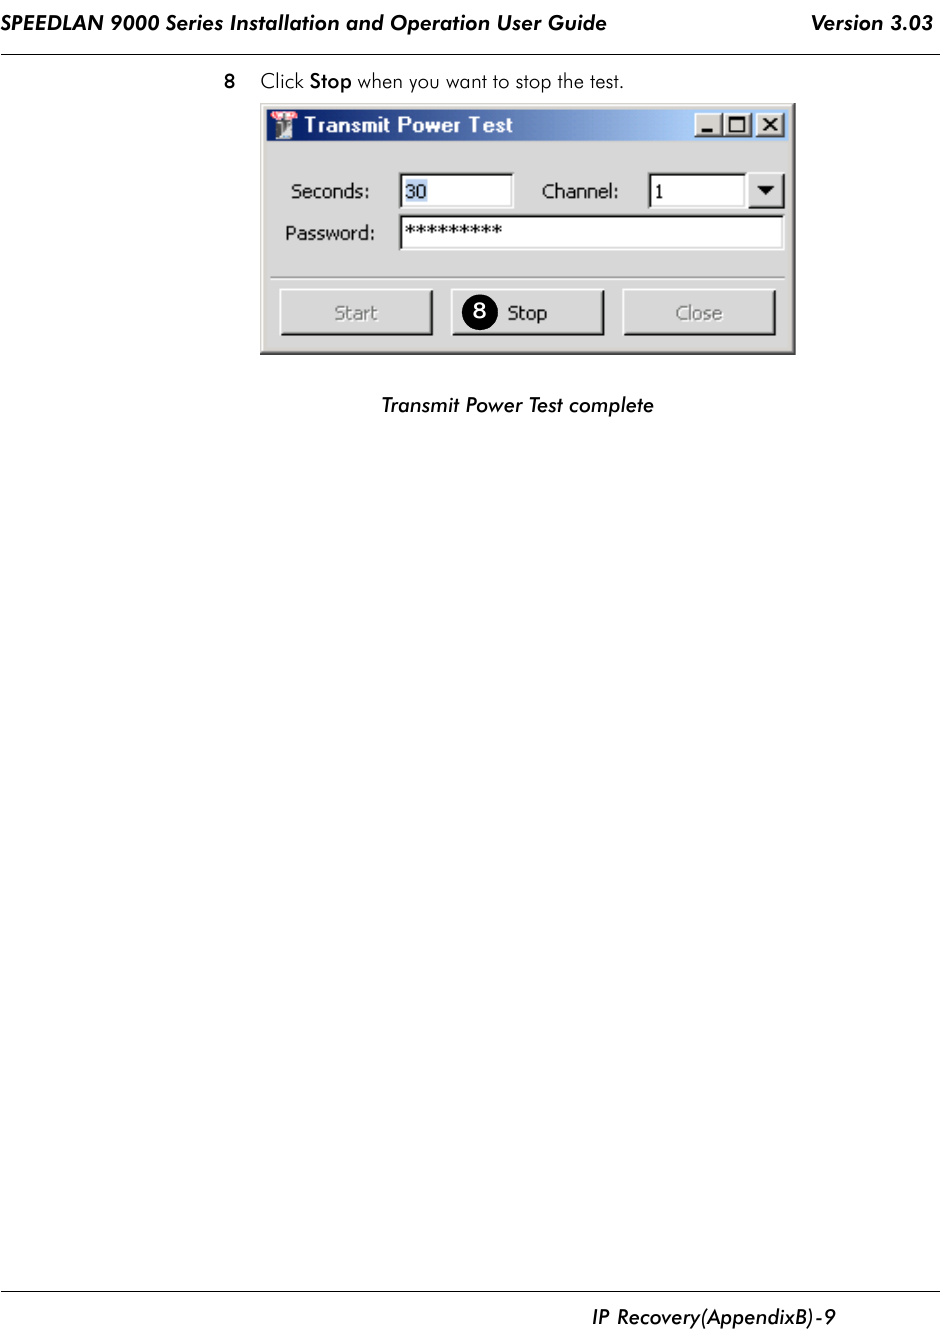 SPEEDLAN 9000 Series Installation and Operation User Guide                                 Version 3.03      IP           Recovery (Appendix B)  - 9                                                                                                                                                                           8Click Stop when you want to stop the test.                                Transmit Power Test complete 8